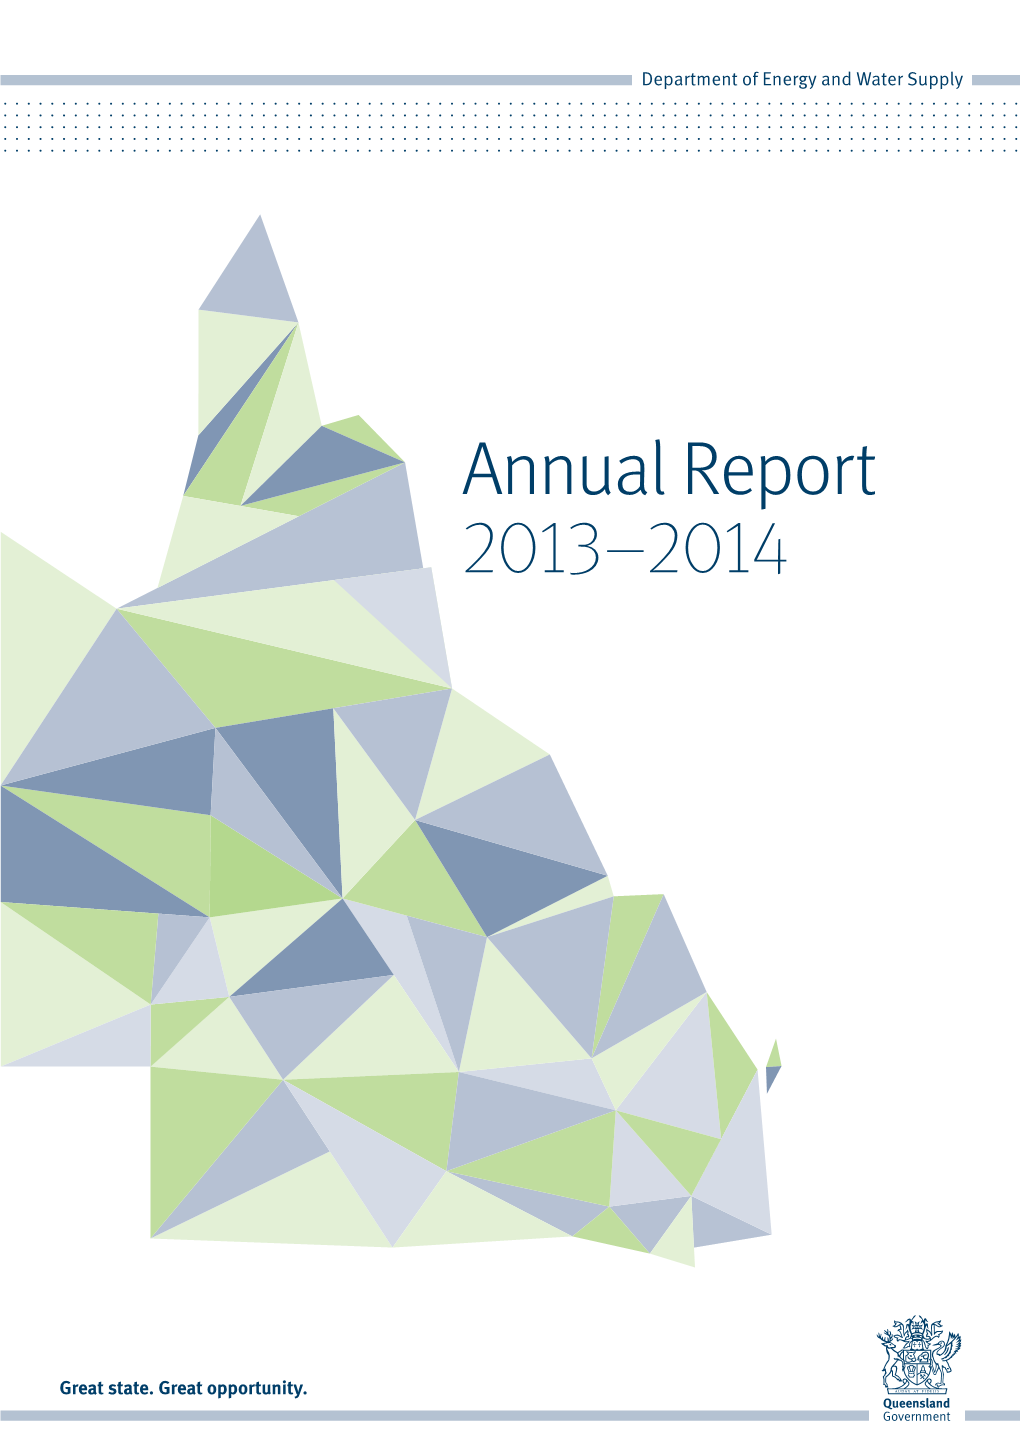 Department of Energy and Water Supply Annual Report 2013-2014